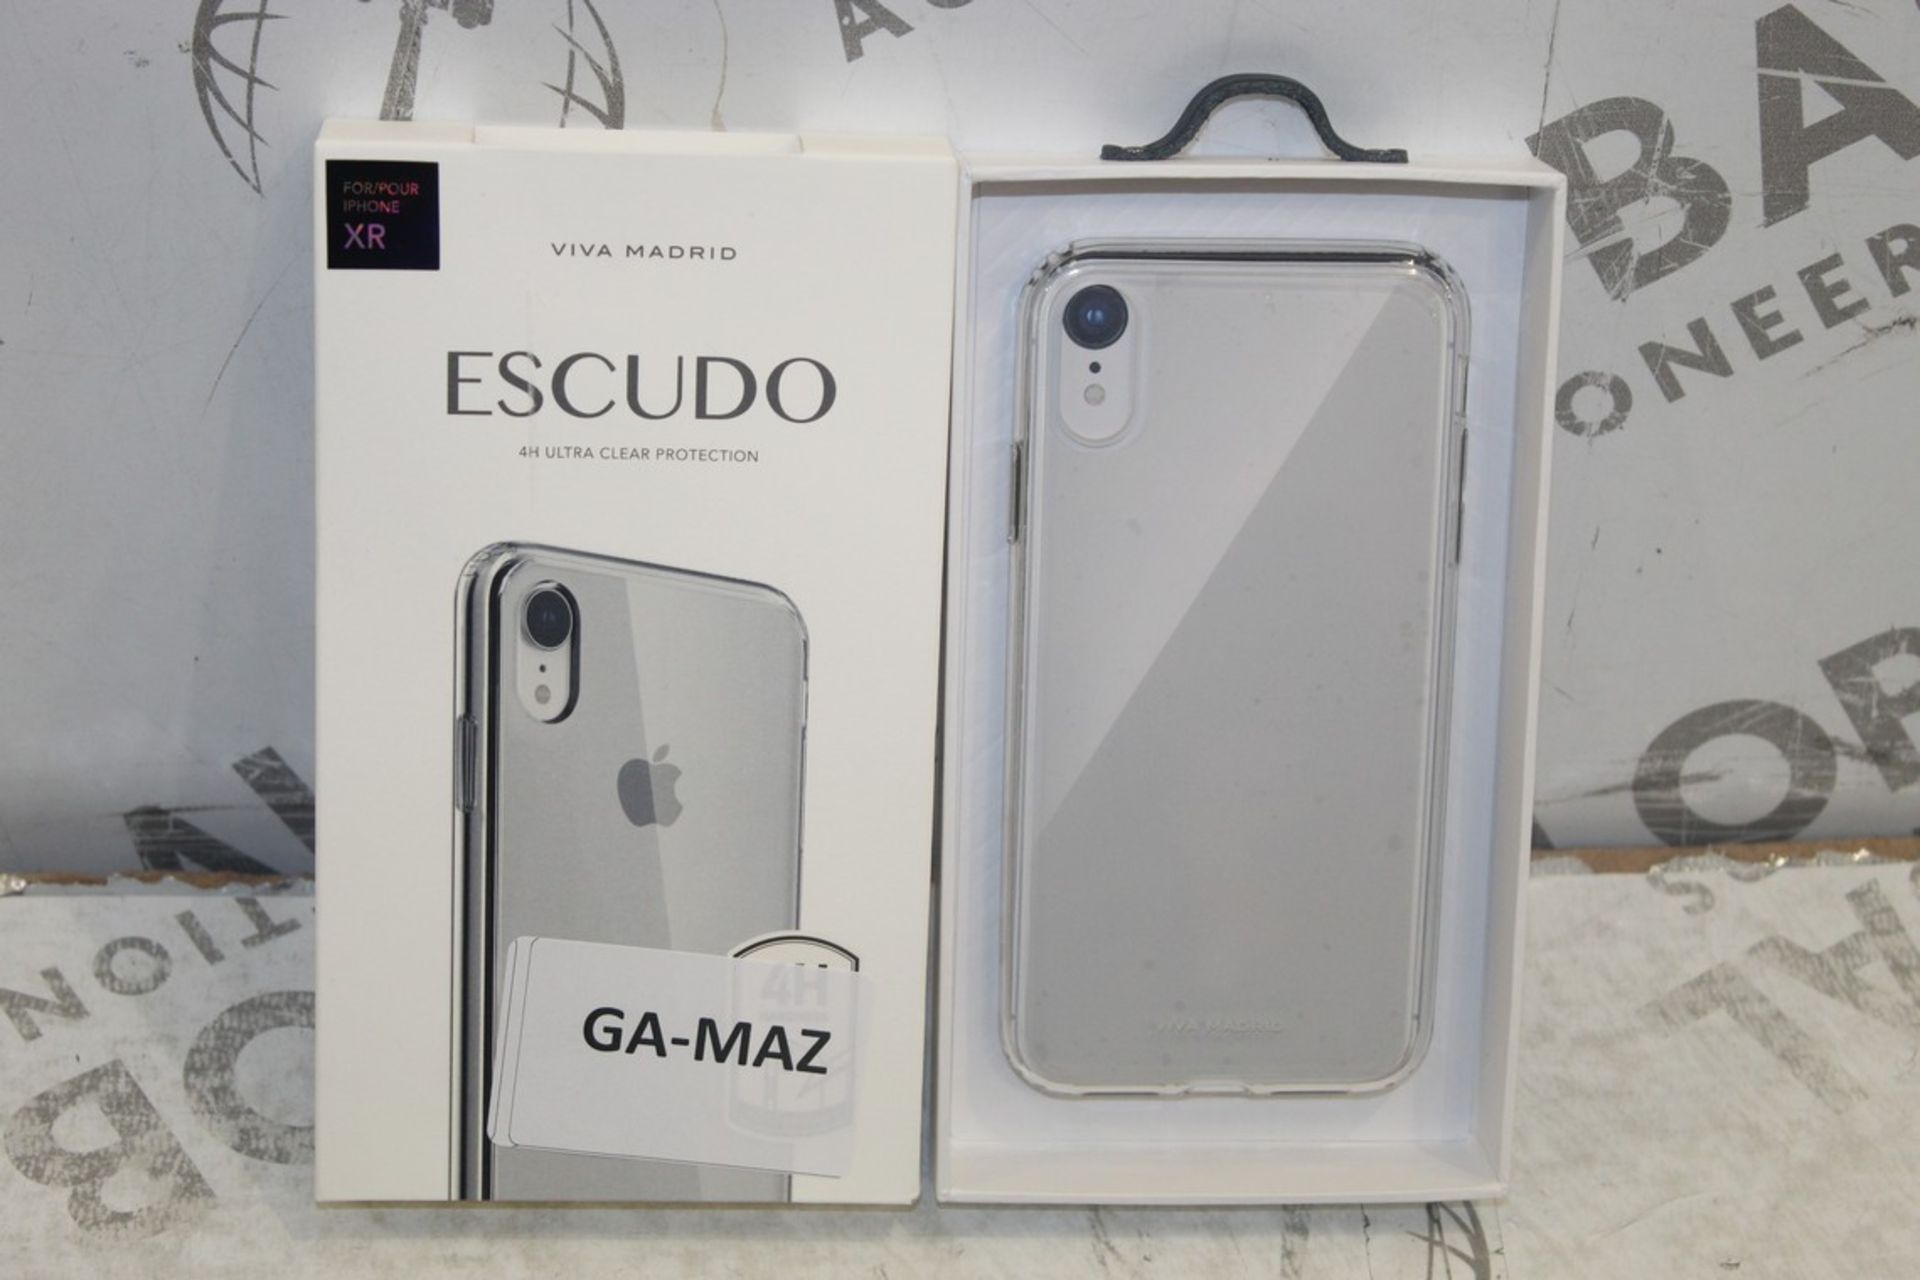 Lot To Contain 5 Viva Madrid ESCUDO4H Ultra Clear Protection iPhone XR Cases Combined RRP £150 (